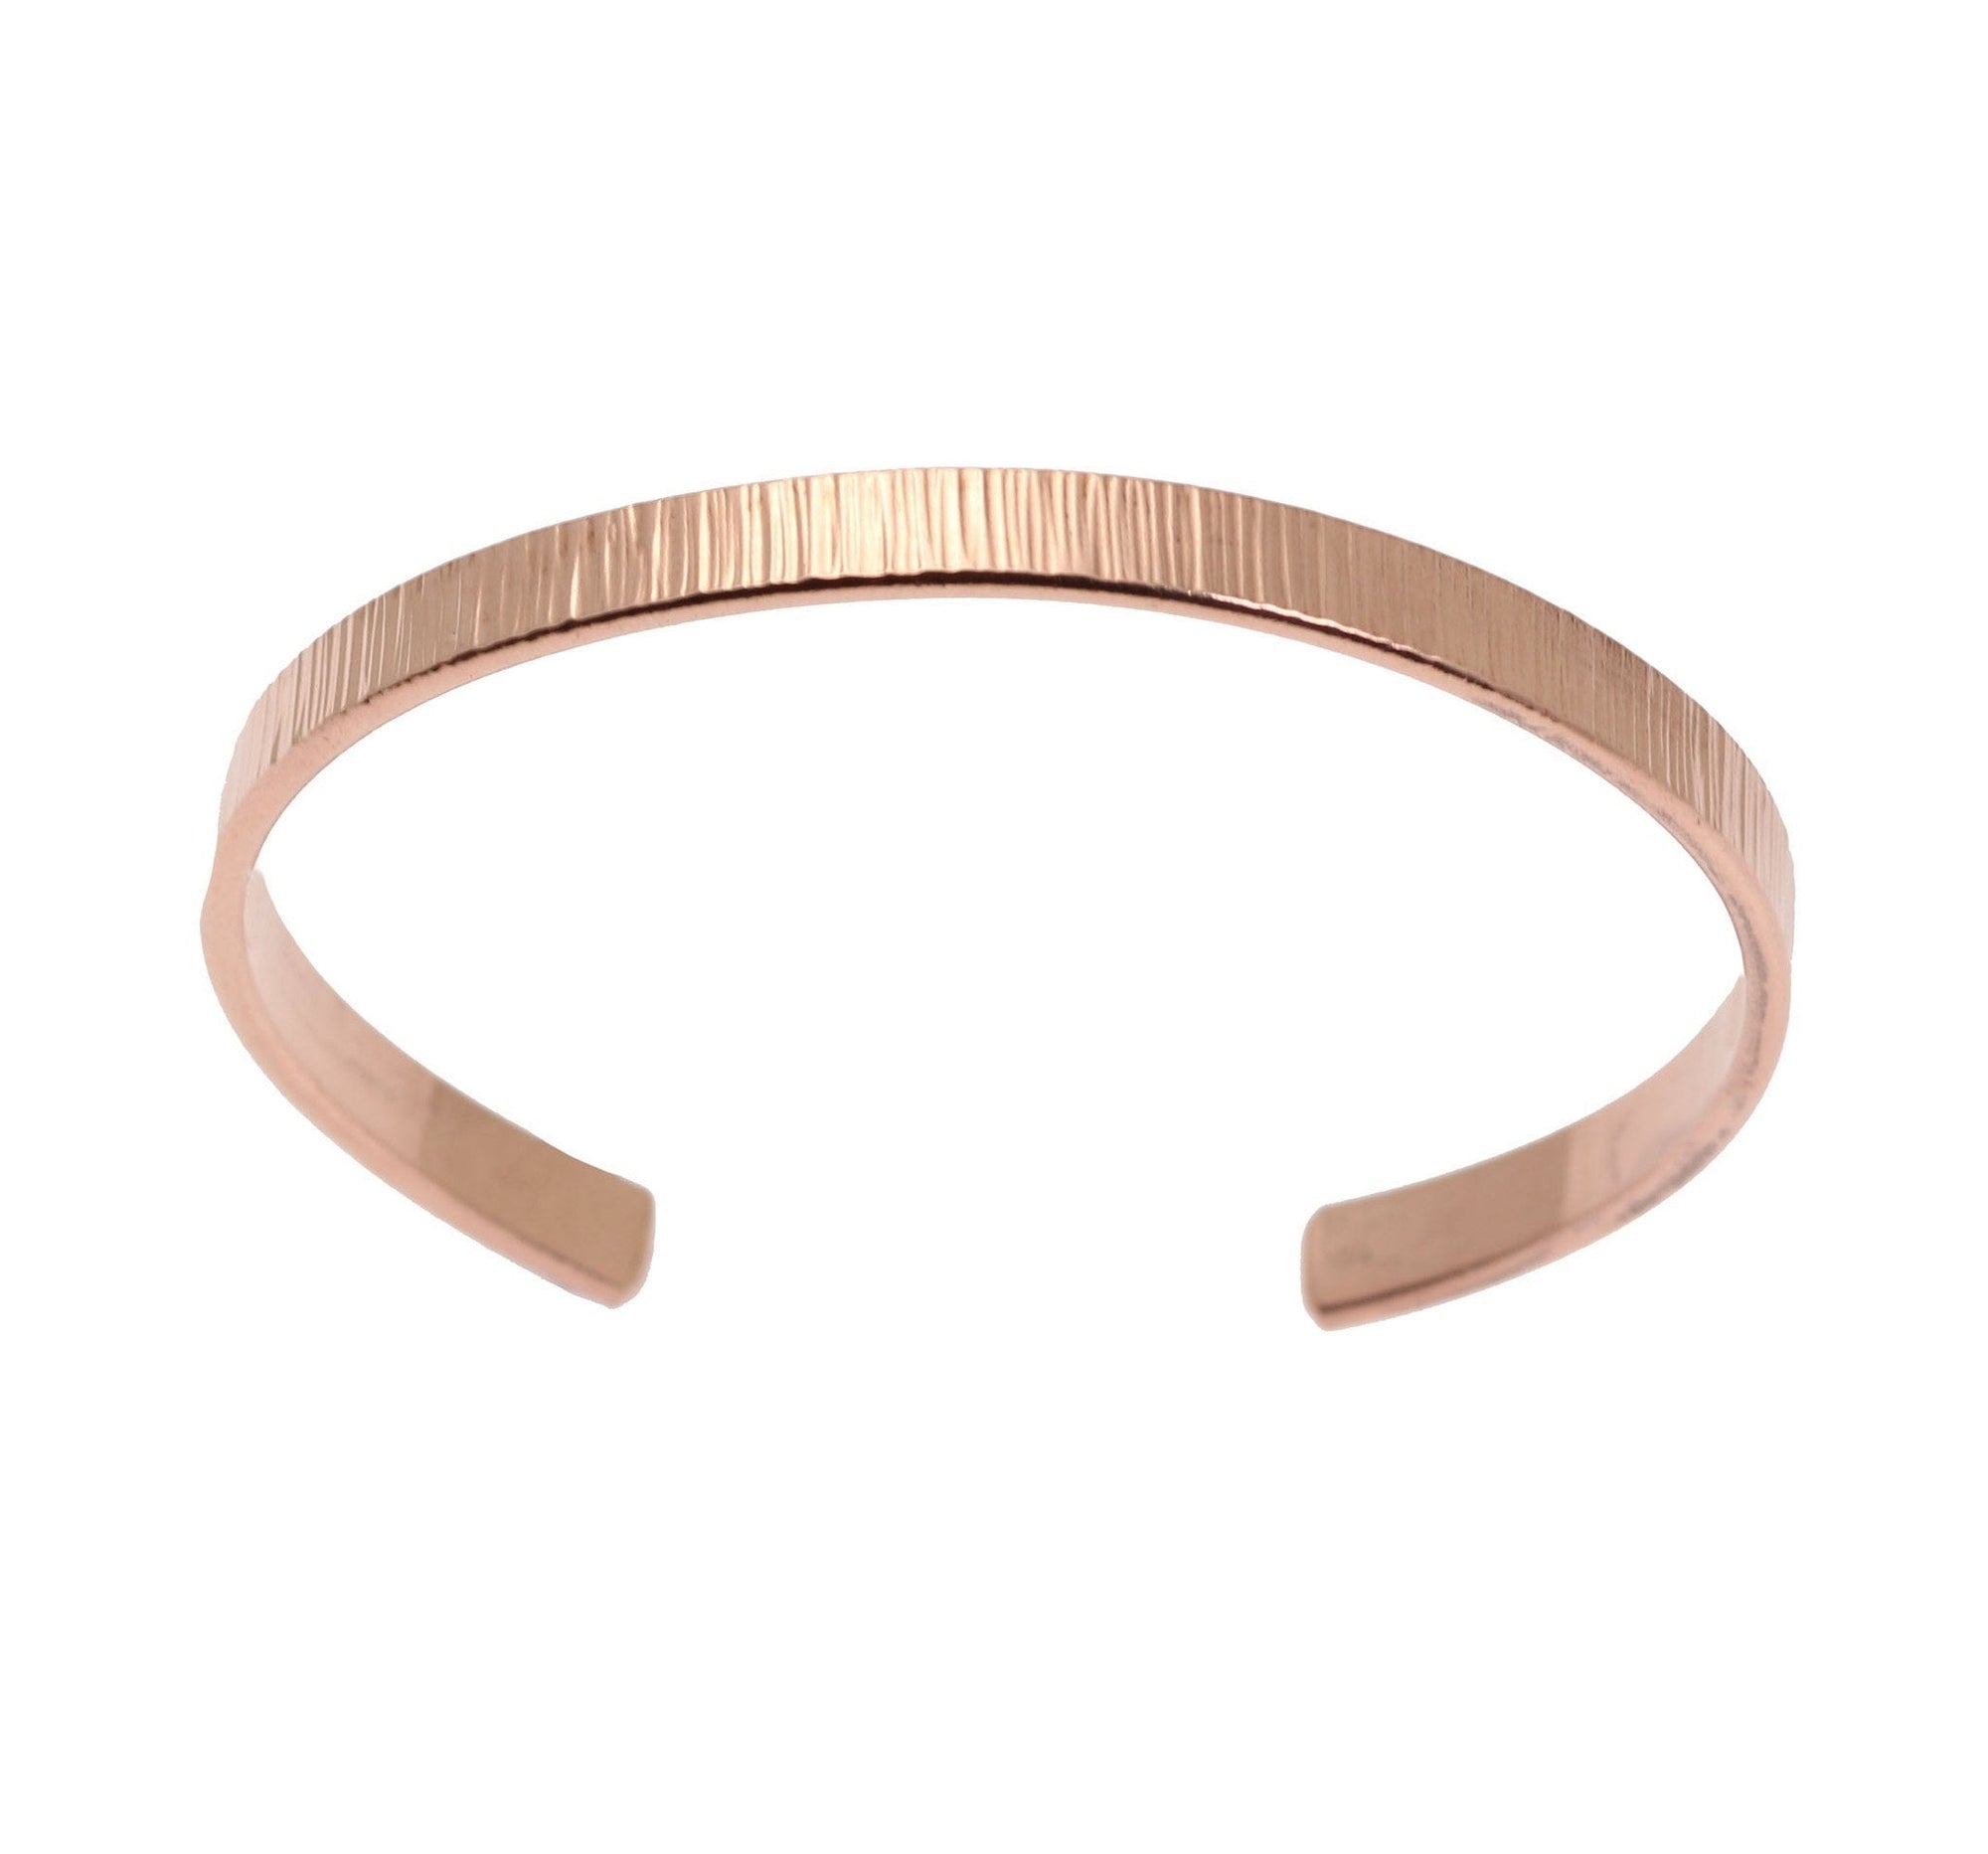 Top View of Chased Thin Copper Cuff Bracelet